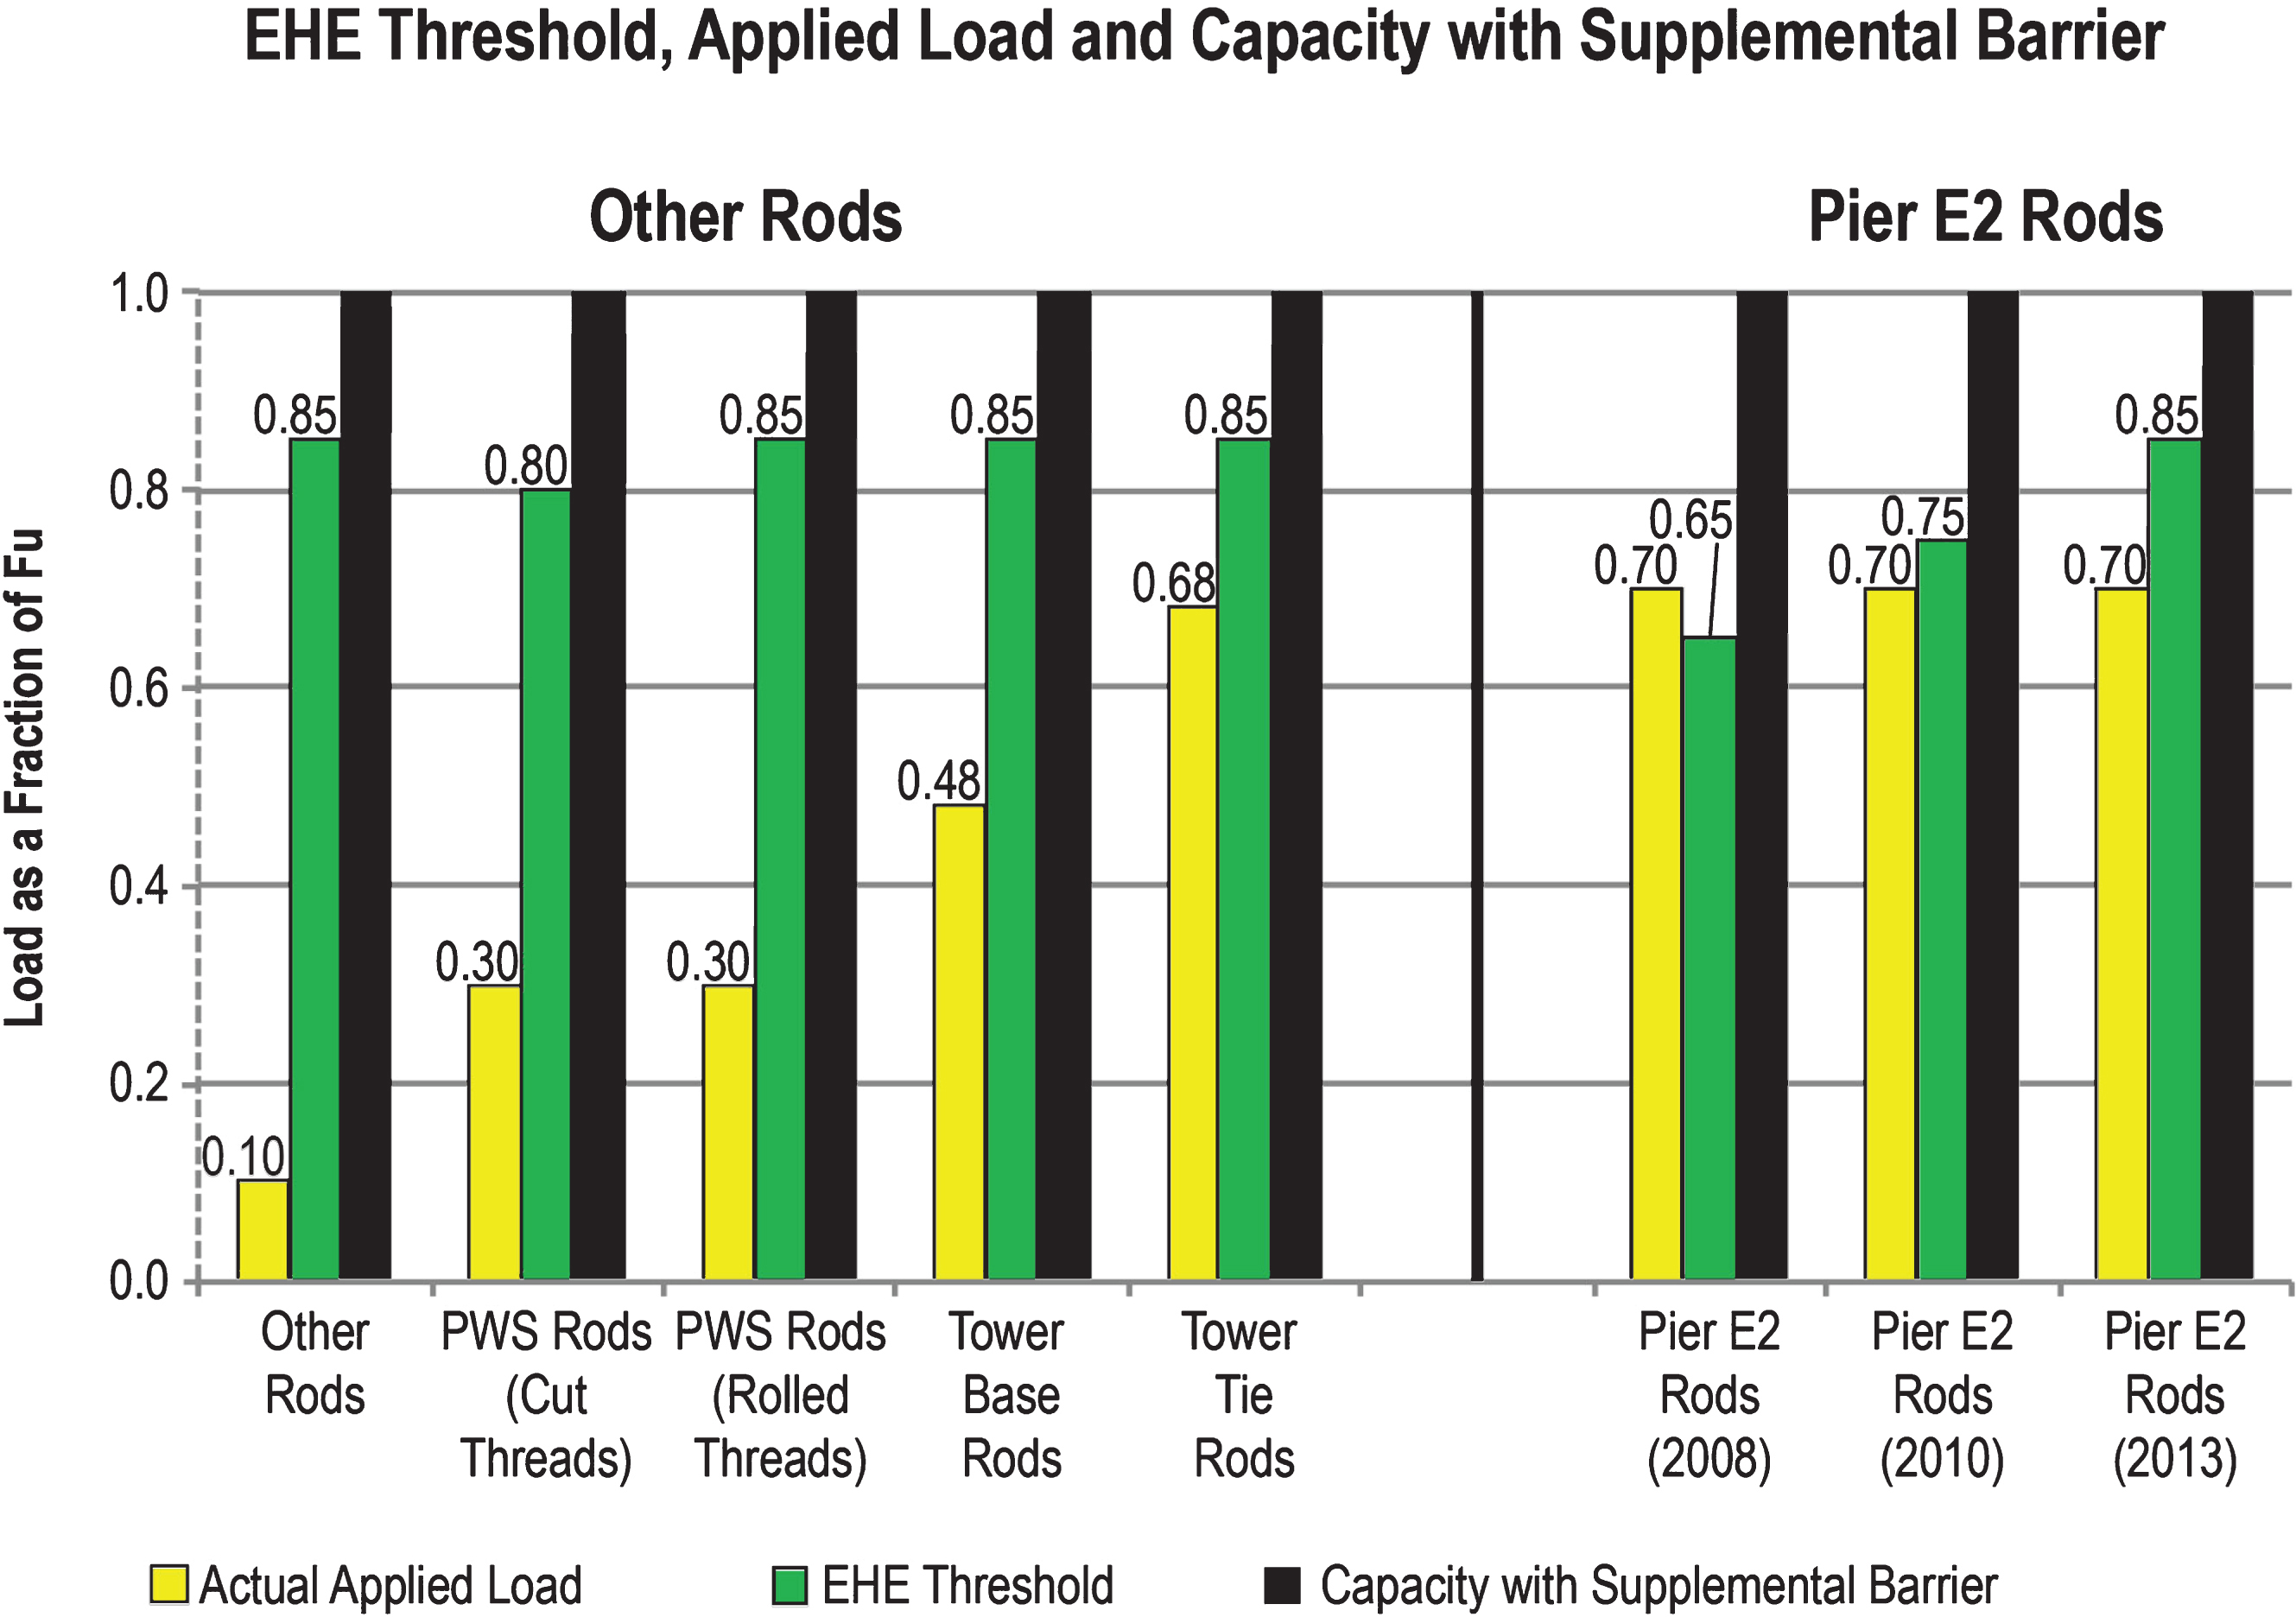 EHE threshold, applied load, and capacity with supplemental barrier.